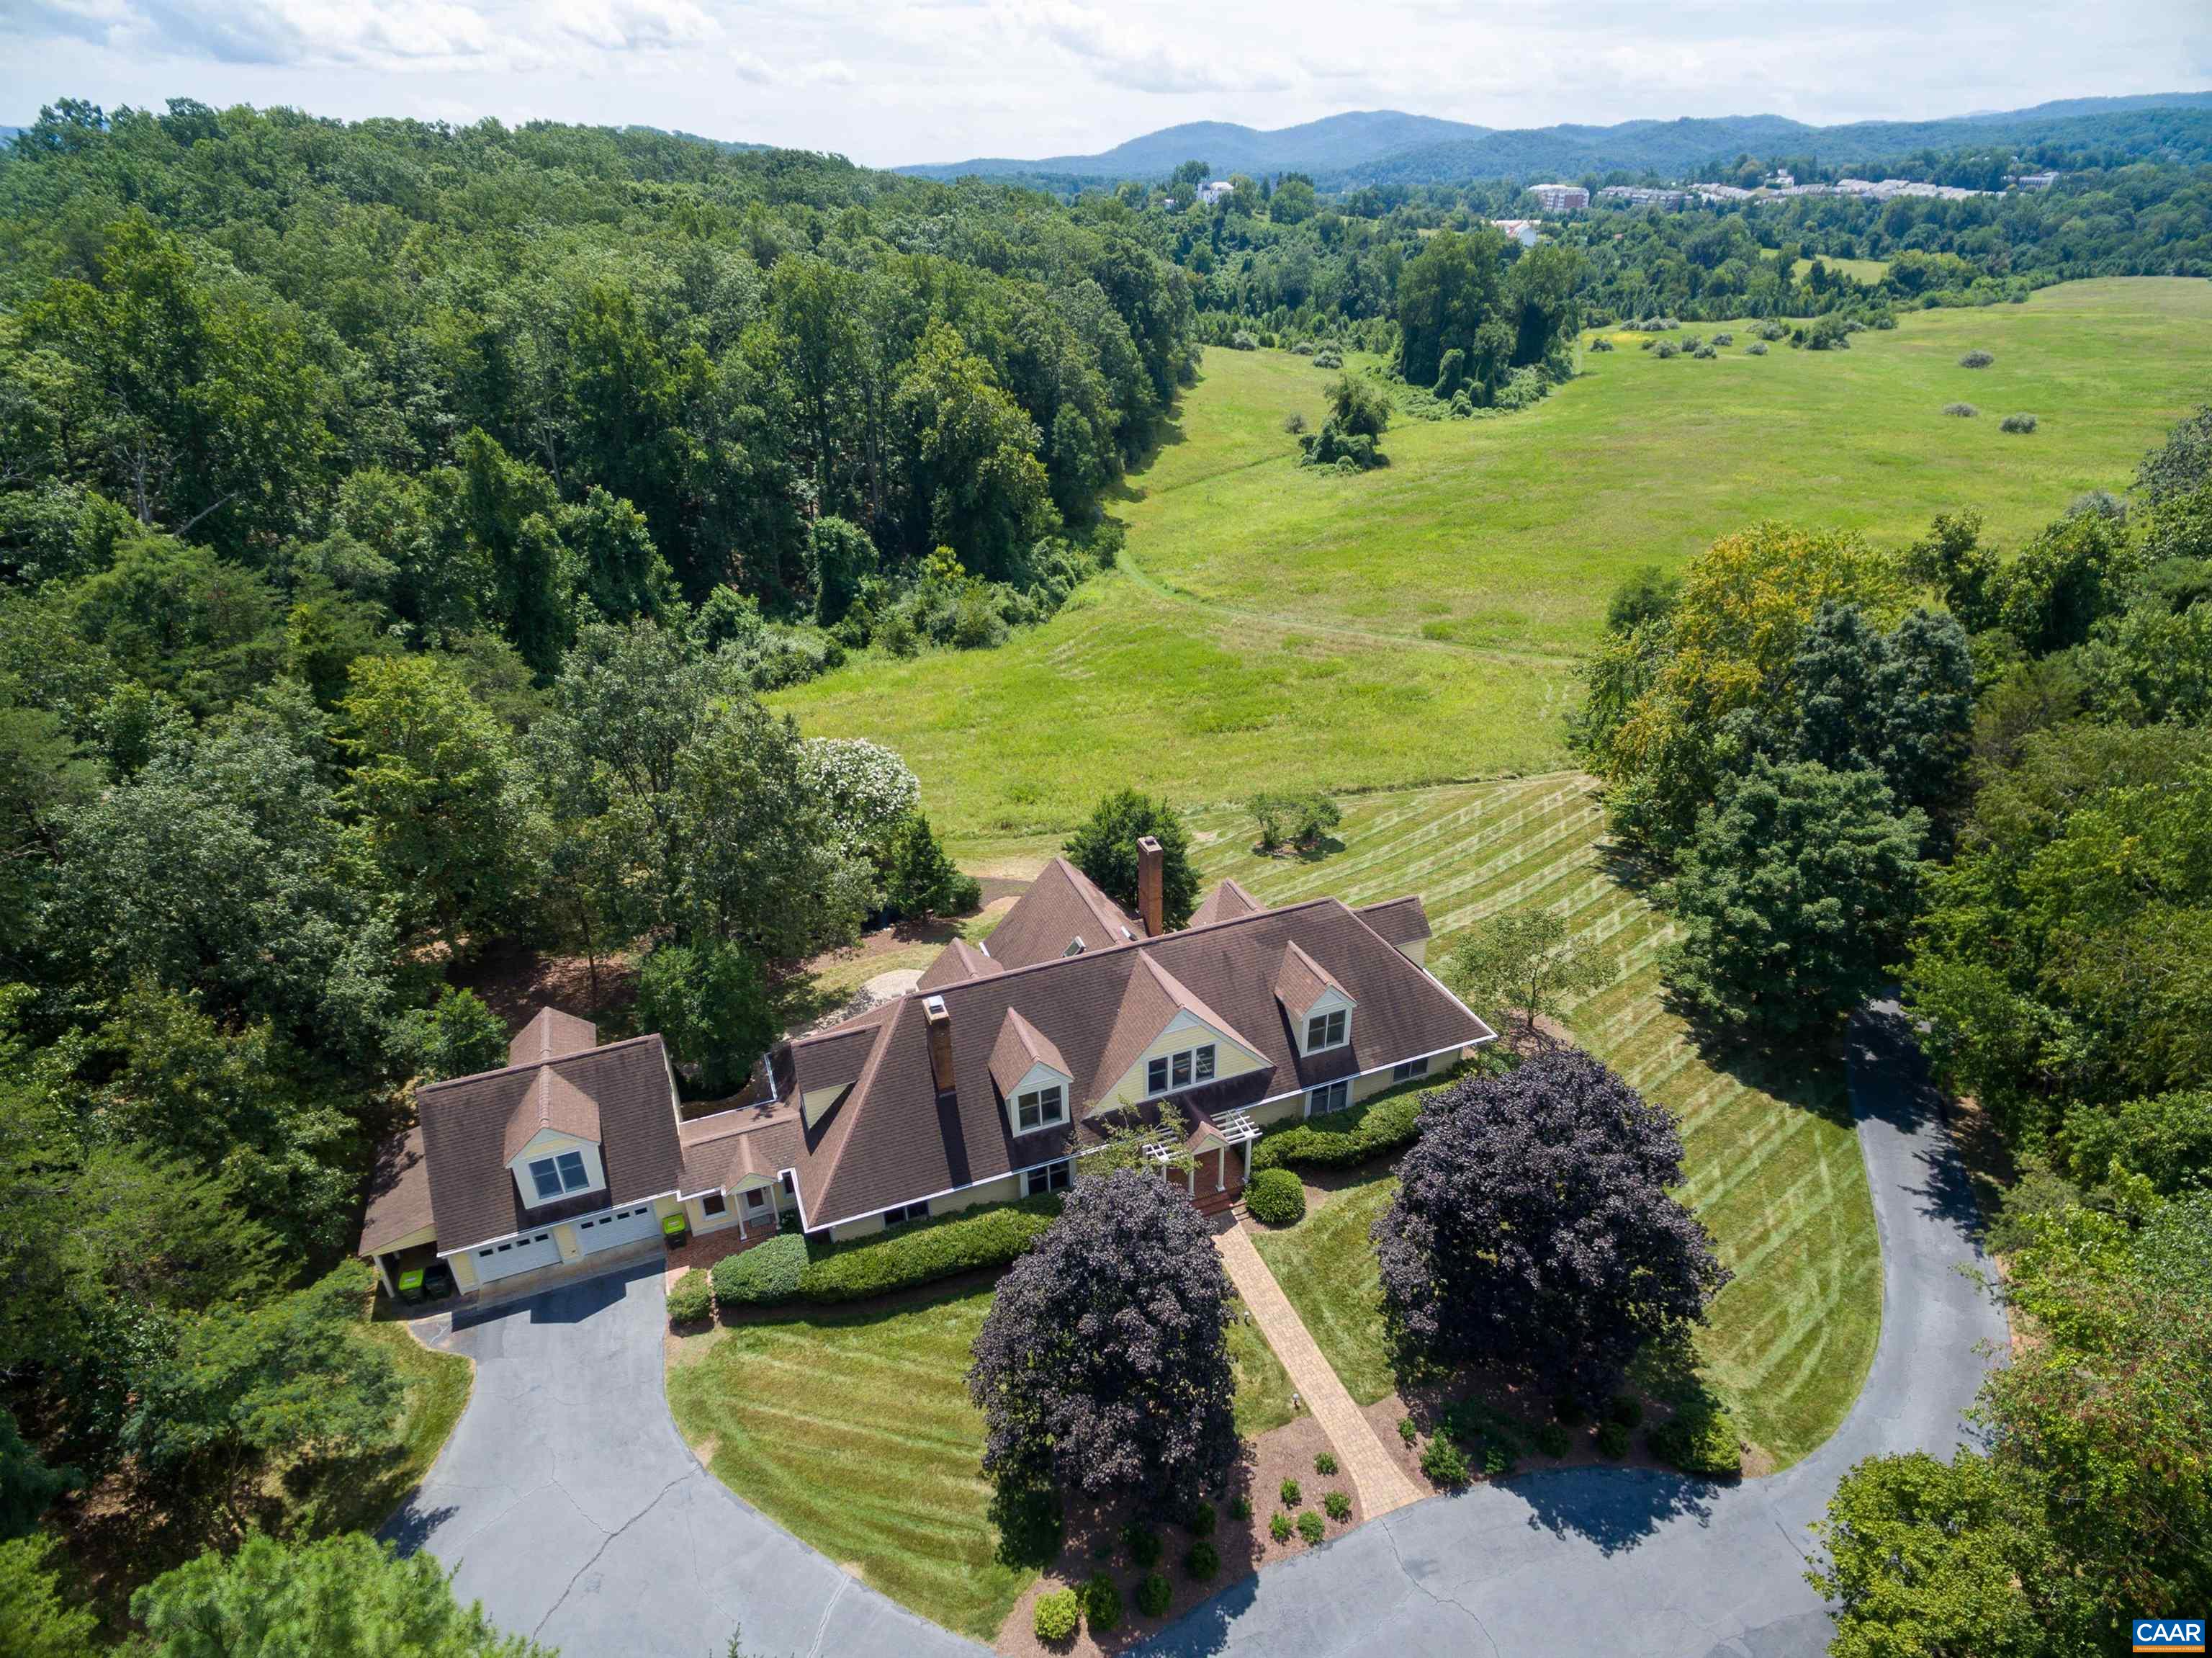 This captivating property, nestled on a private 3.28 acres, offers a harmonious blend of luxurious design & idyllic natural surroundings. The 1st-floor master suite offers picturesque views of a rolling pastoral field that stretches towards beautiful mountains. A gourmet kitchen features sleek countertops, abundant cabinetry,  stainless appliances & a cozy breakfast area. A family room, study, three additional bedrooms & an-over-the-garage office make this a versatile floor plan. The heart of the home is the living room, where comfort meets grandeur. Soaring ceilings create an airy ambiance, inviting abundant natural light for hosting a gathering or enjoying a quiet evening by the fireplace. See the list of many improvements/upgrades in the documents section. You'll enjoy a sense of community and access to Charlottesville’s best that cater to every facet of your lifestyle, whether it's leisurely strolls along scenic streets, a quick trip to the nearby farmer’s market, or many restaurants & shops.